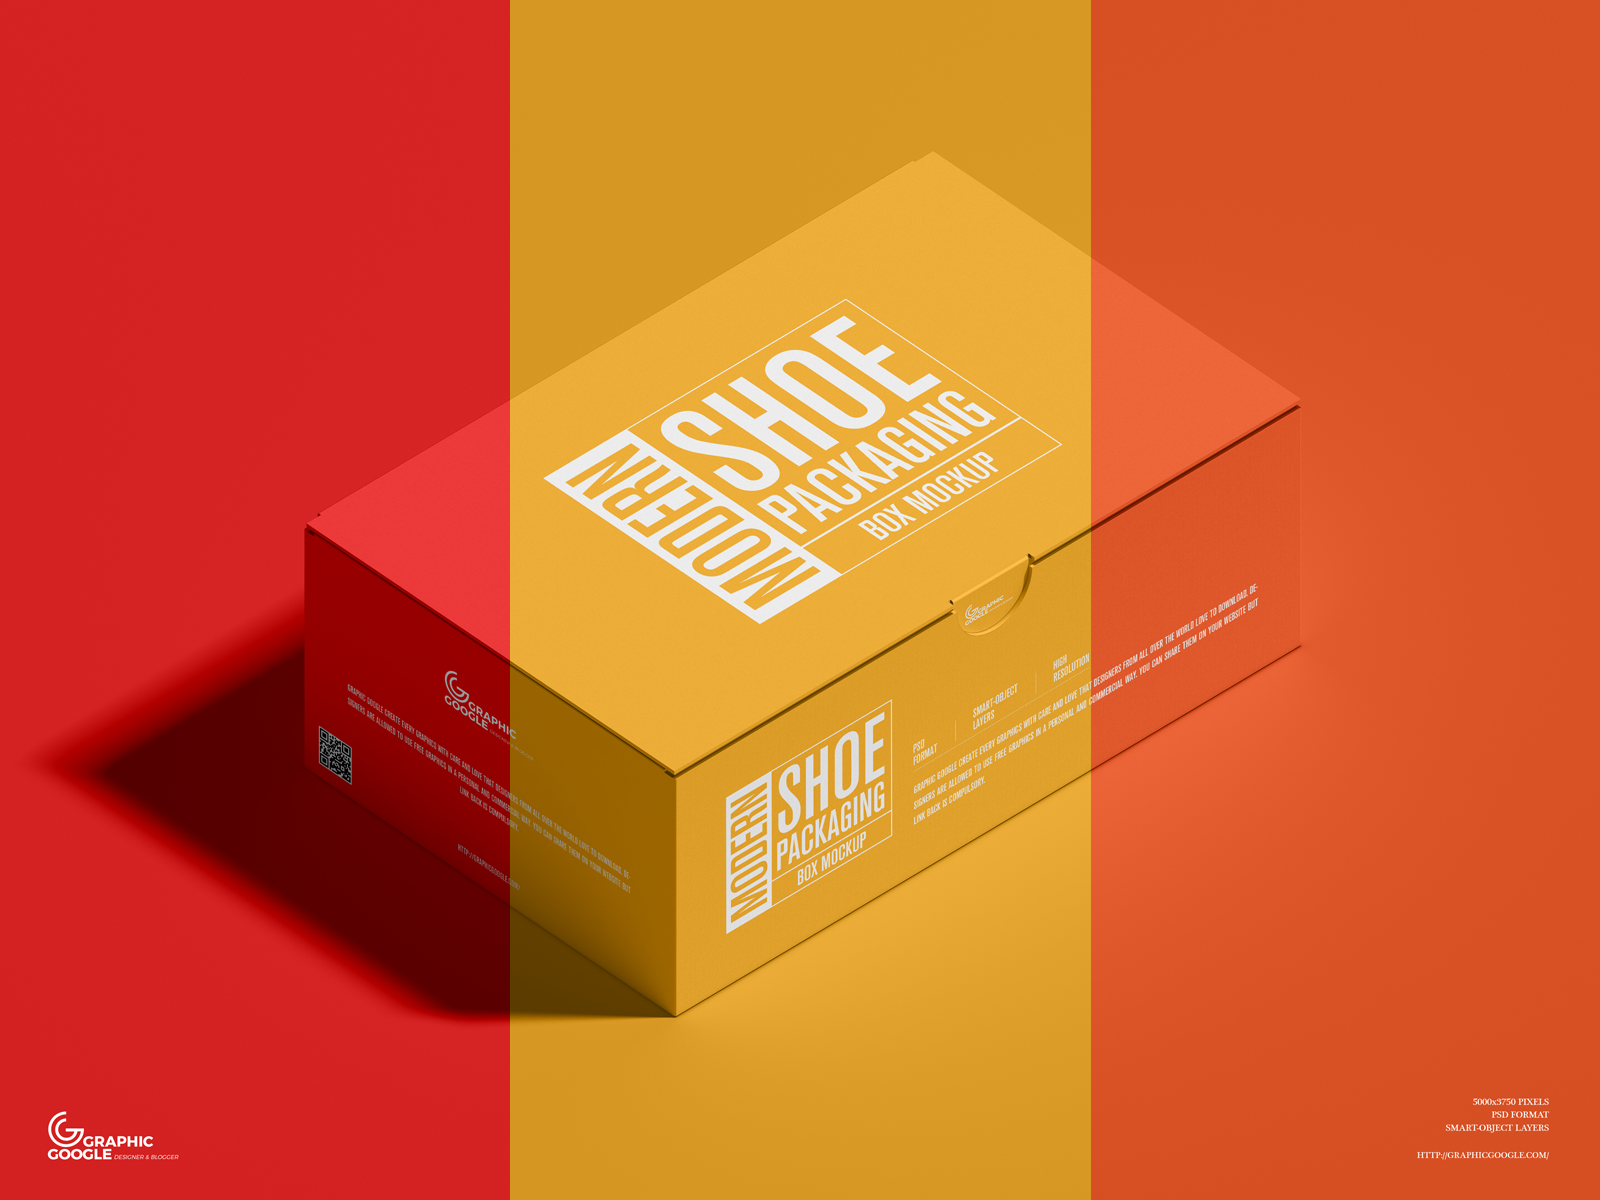 Download Free Shoe Packaging Box Mockup By Graphic Google On Dribbble